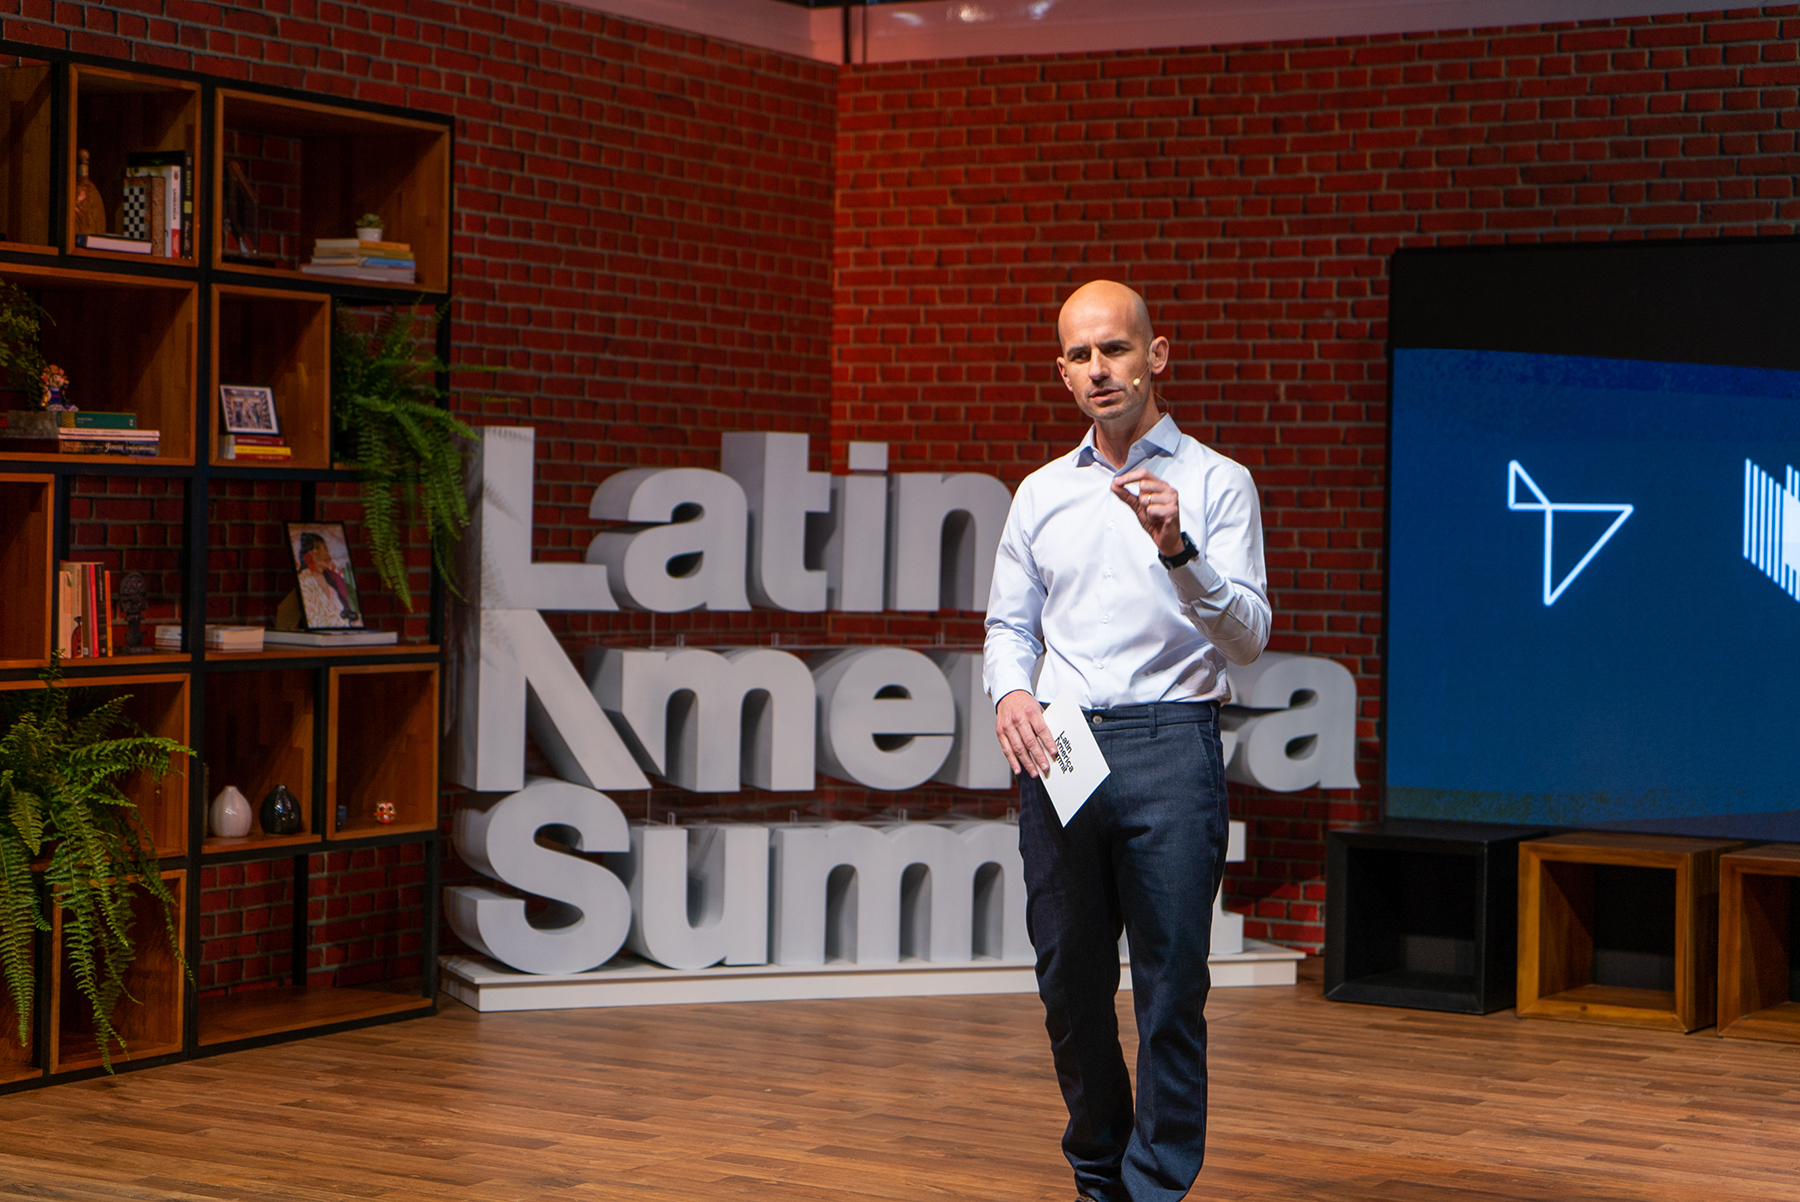 EBANX CEO and co-founder Joao Del Valle addresses the audience of the company's Latin America Summit held during 2020 in Brazil.